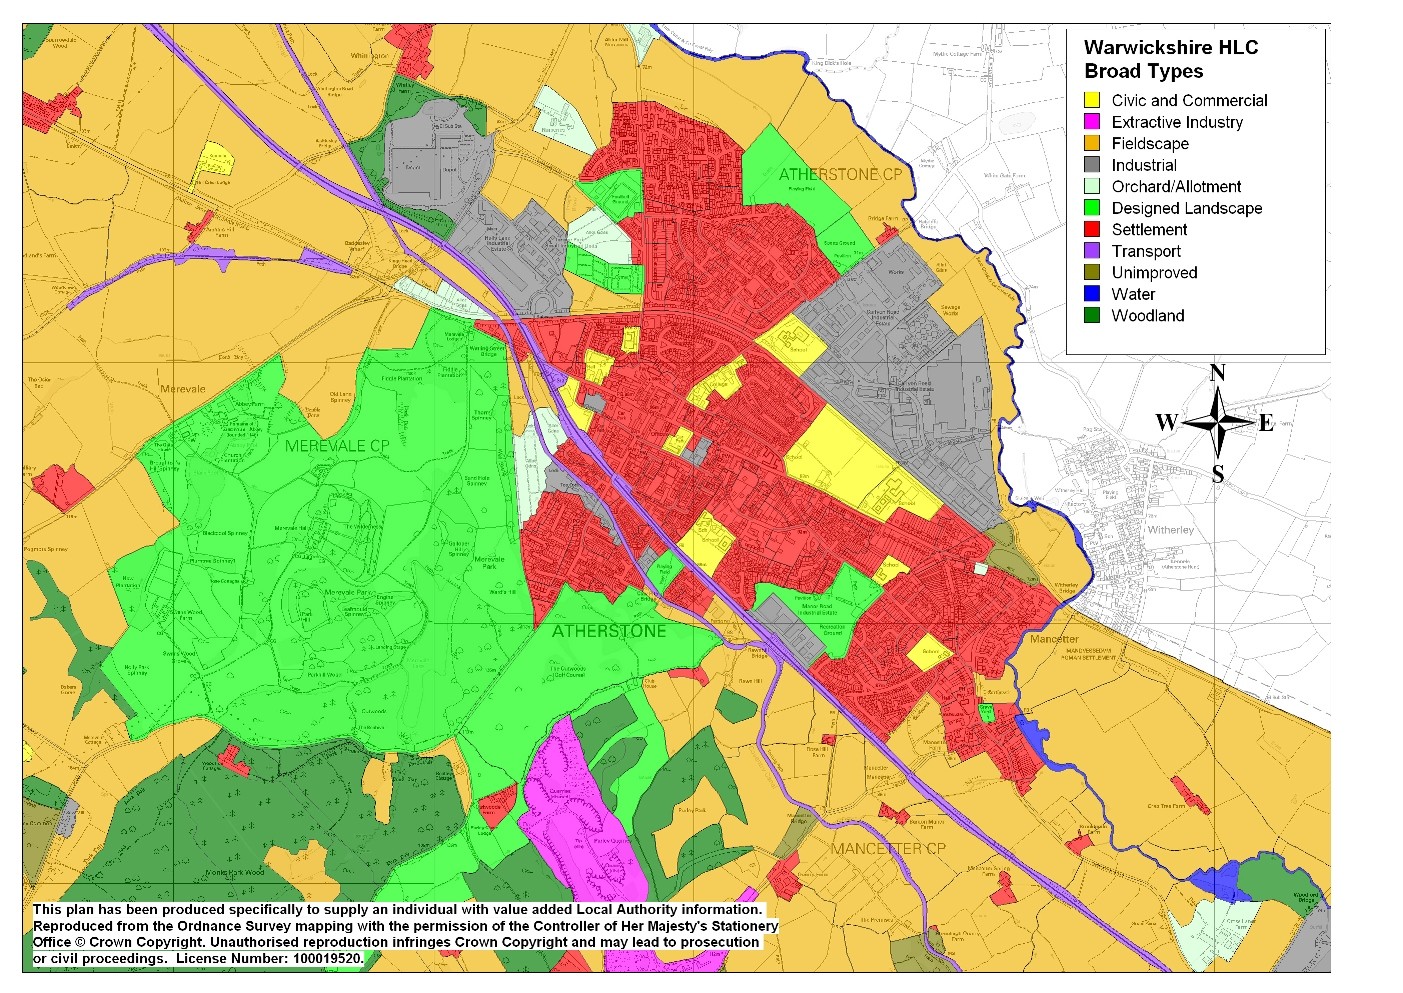 Extract from the Warwickshire HLC data, Atherstone area